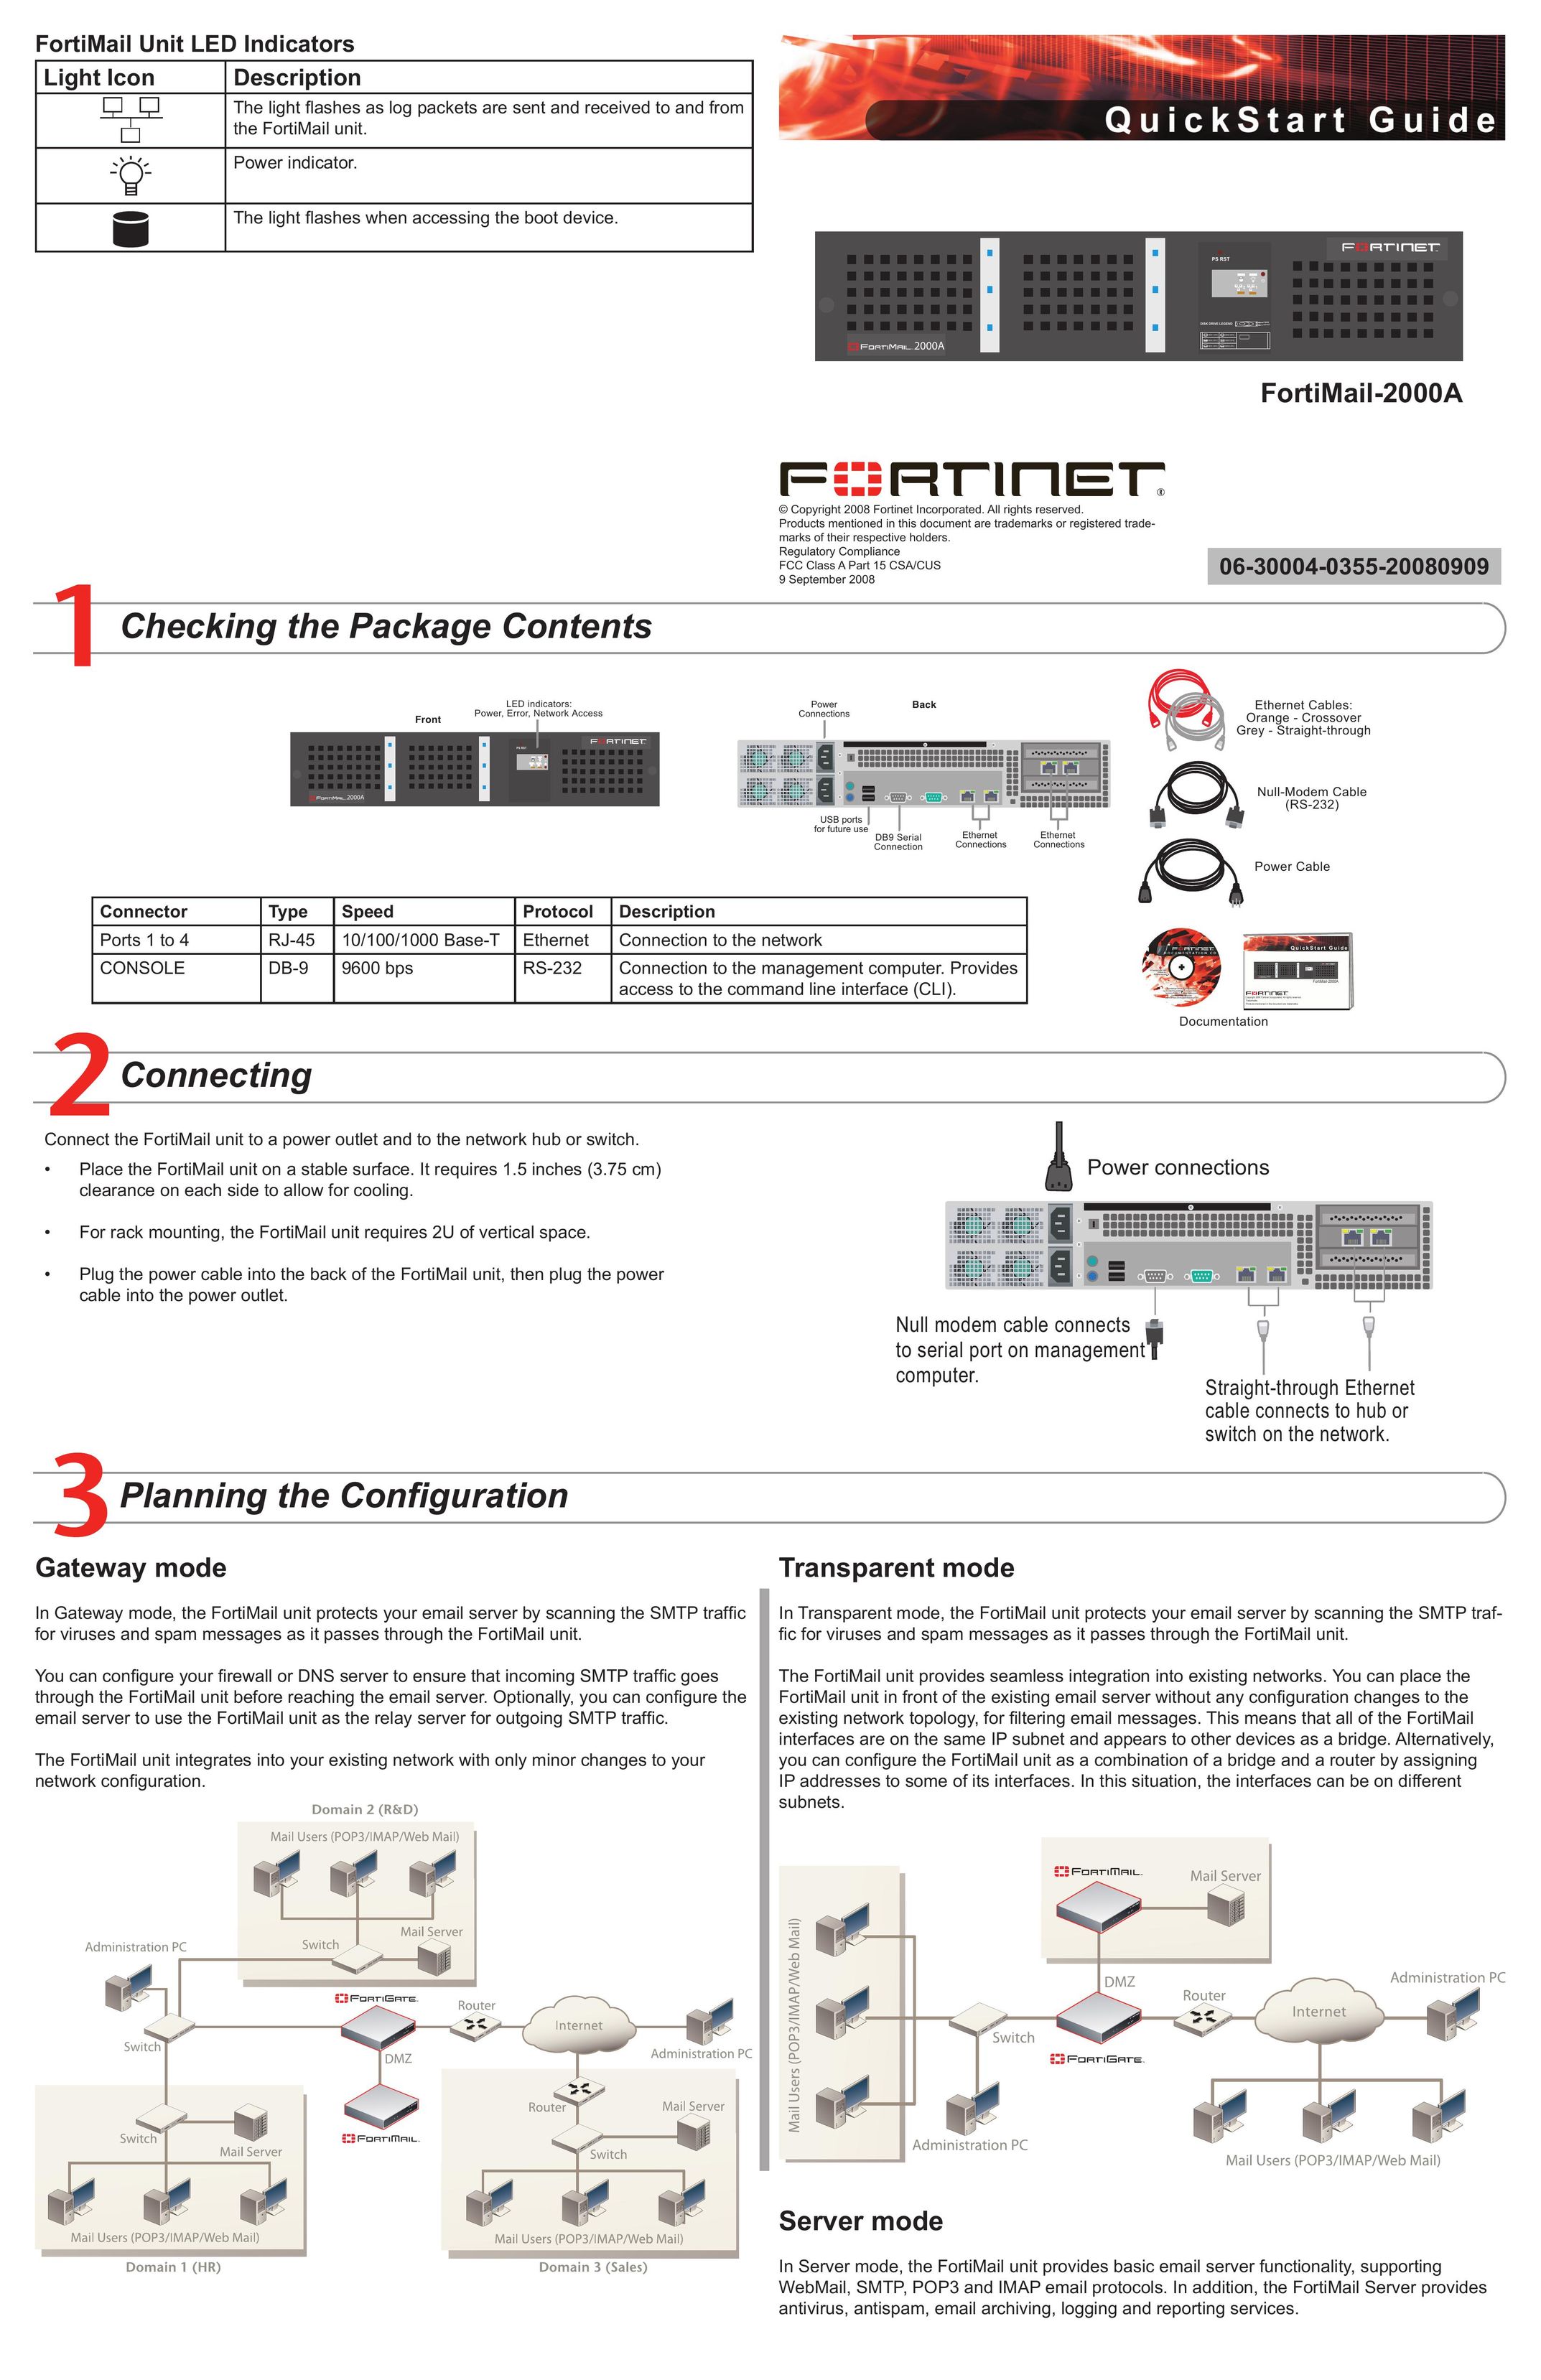 Fortinet FortiMail-2000A Network Card User Manual